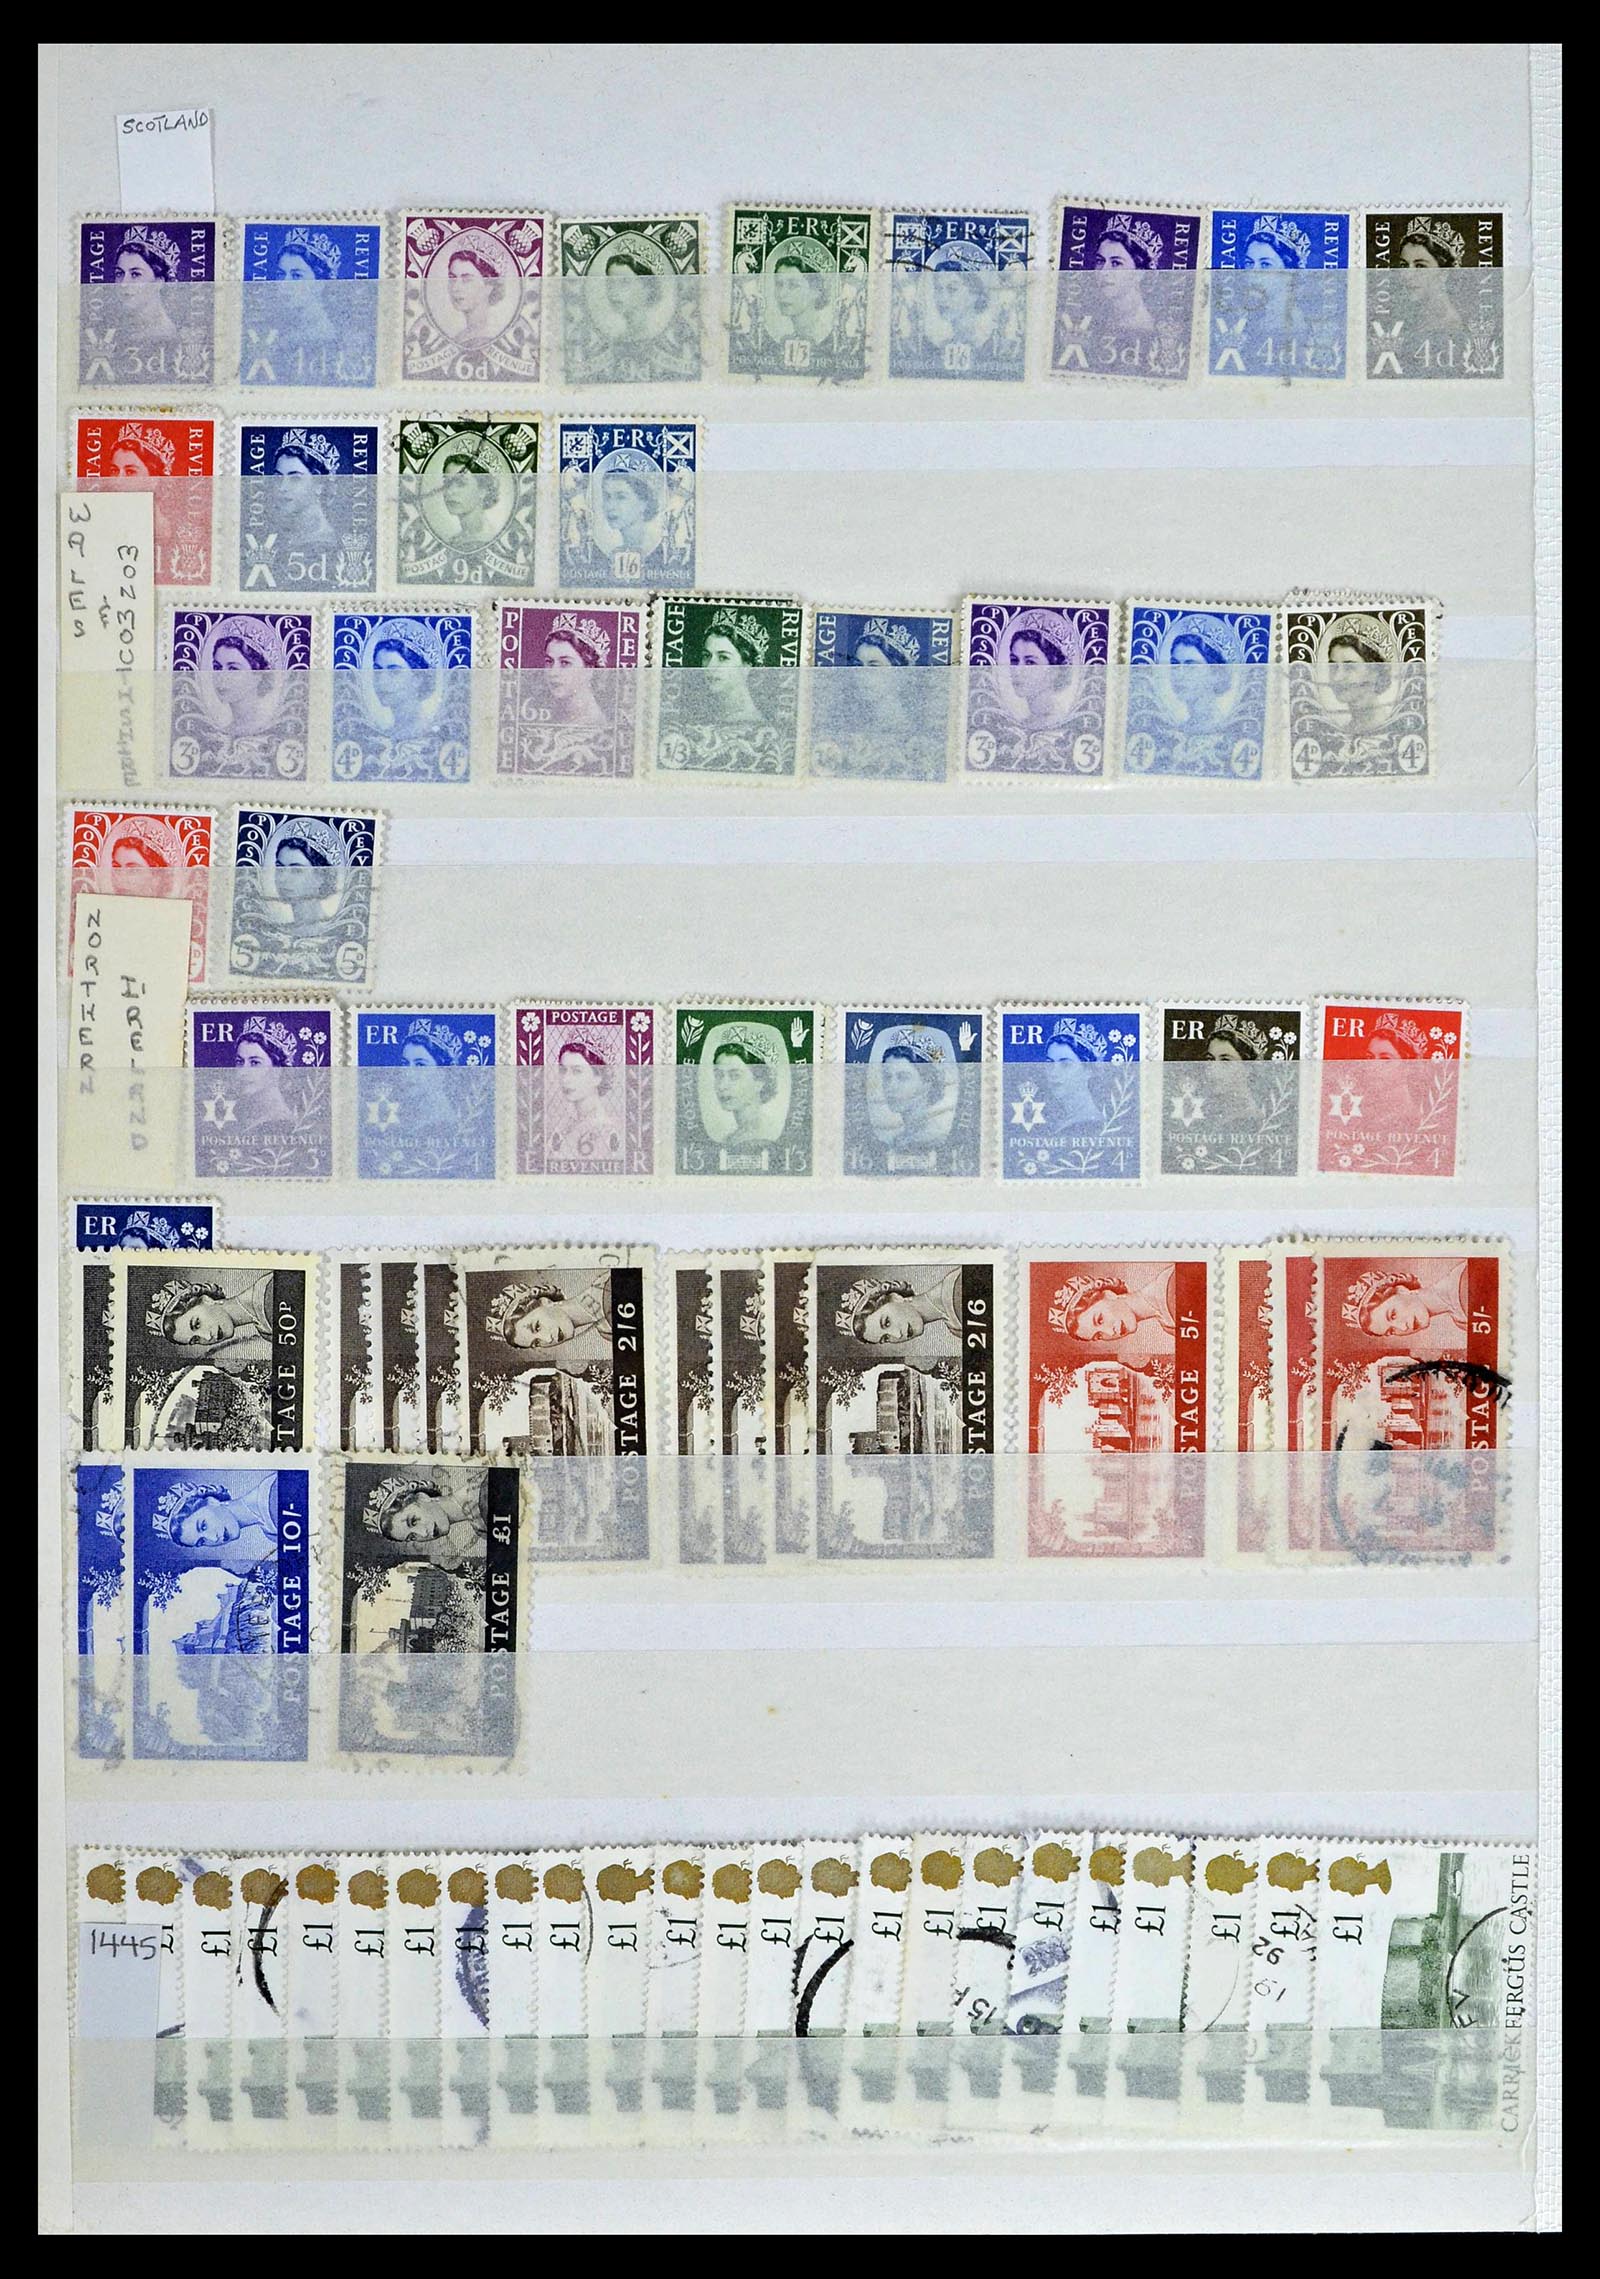 39196 0063 - Stamp collection 39196 Great Britain 1844-1955.